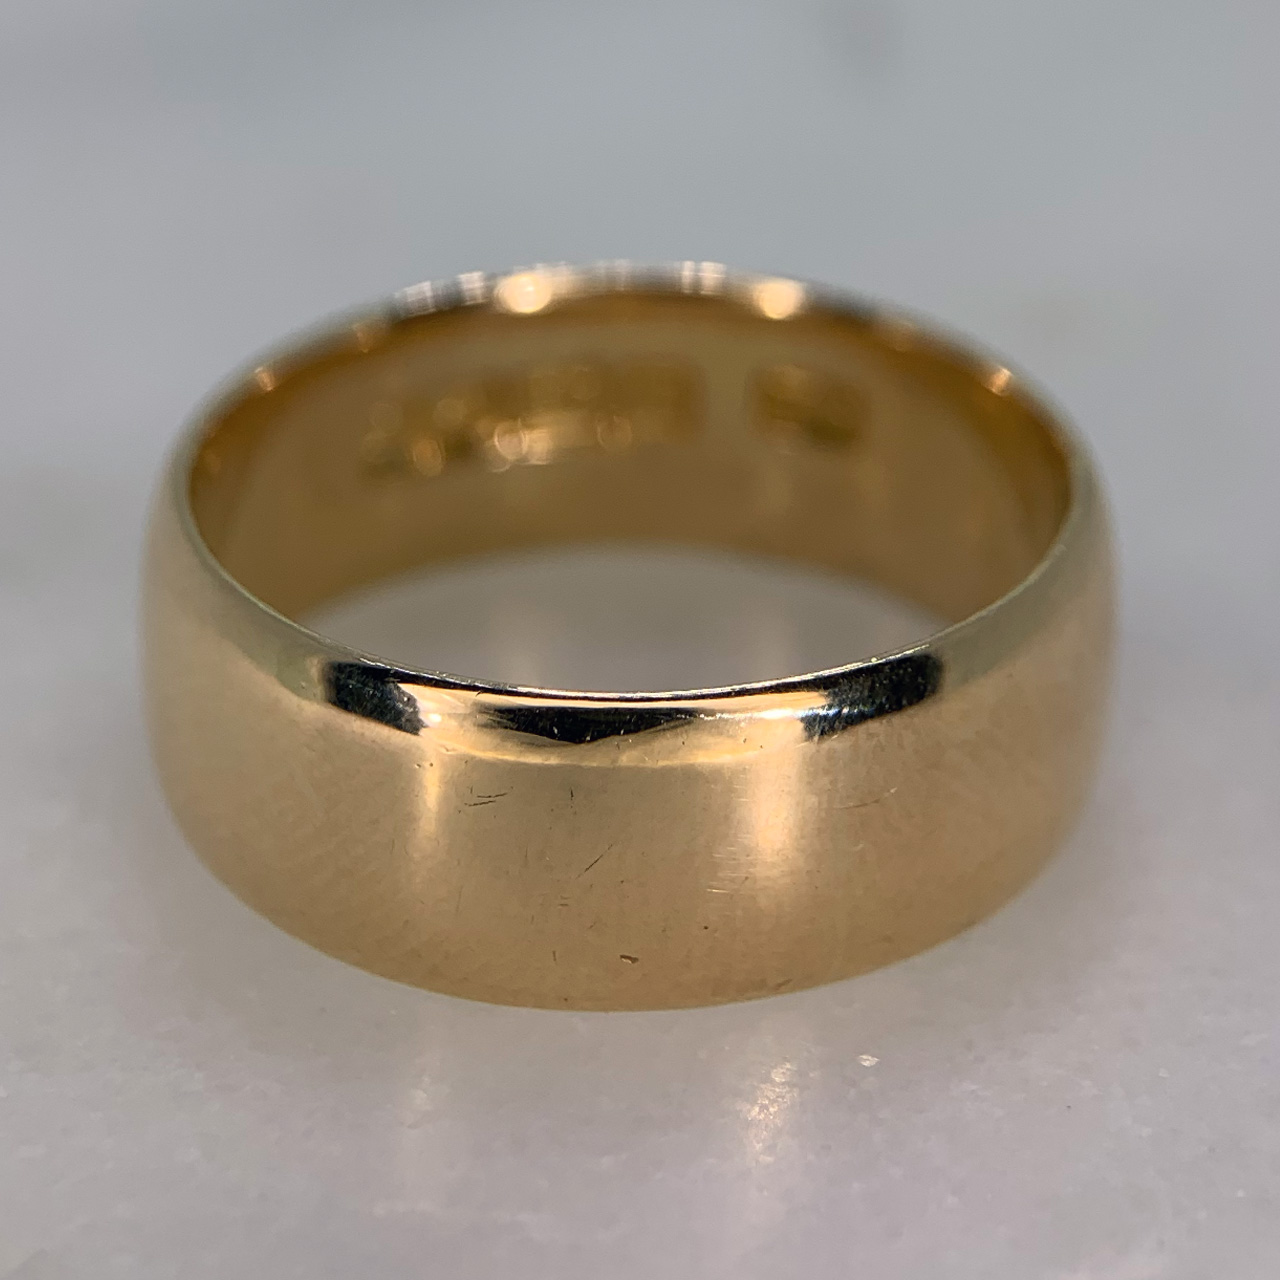 Half Round Wedding Band in 18ct dark yellow gold, Hallmarked Birmingham (1933). The Ring has a width of 8mm and has a super clear hallmark and makers mark inside the shank. This ring is in excellent condition. 